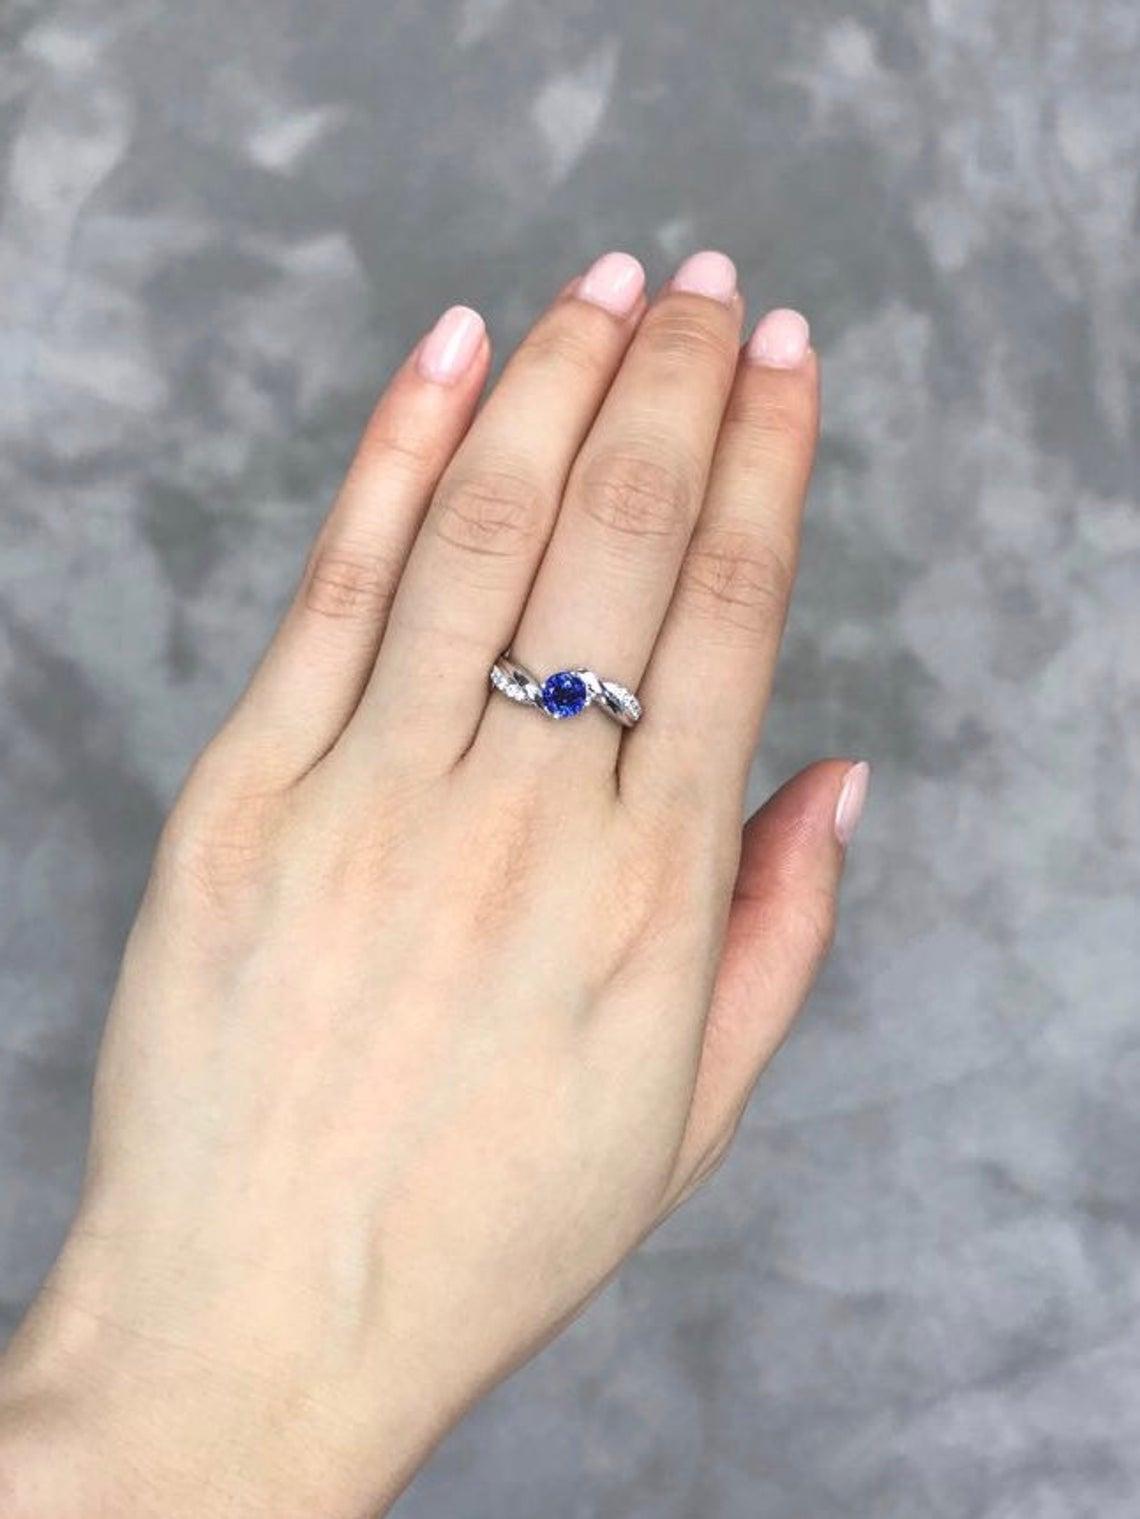 For Sale:  Vintage Style Blue Sapphire and Diamond Engagement Ring in 18K White Gold 3